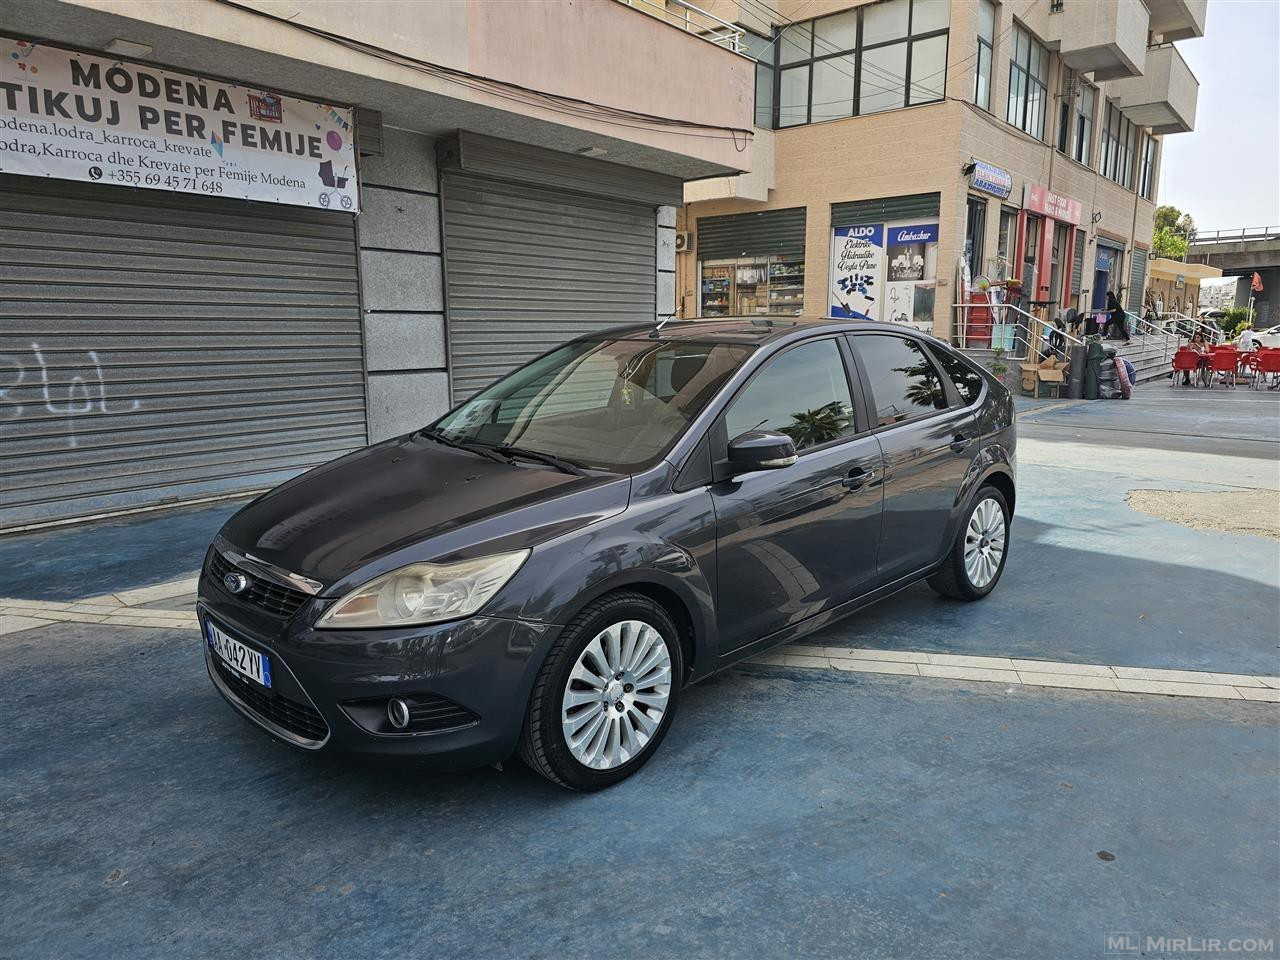 FORD FOCUS 2008 NAFTE 1.6  MANUAL